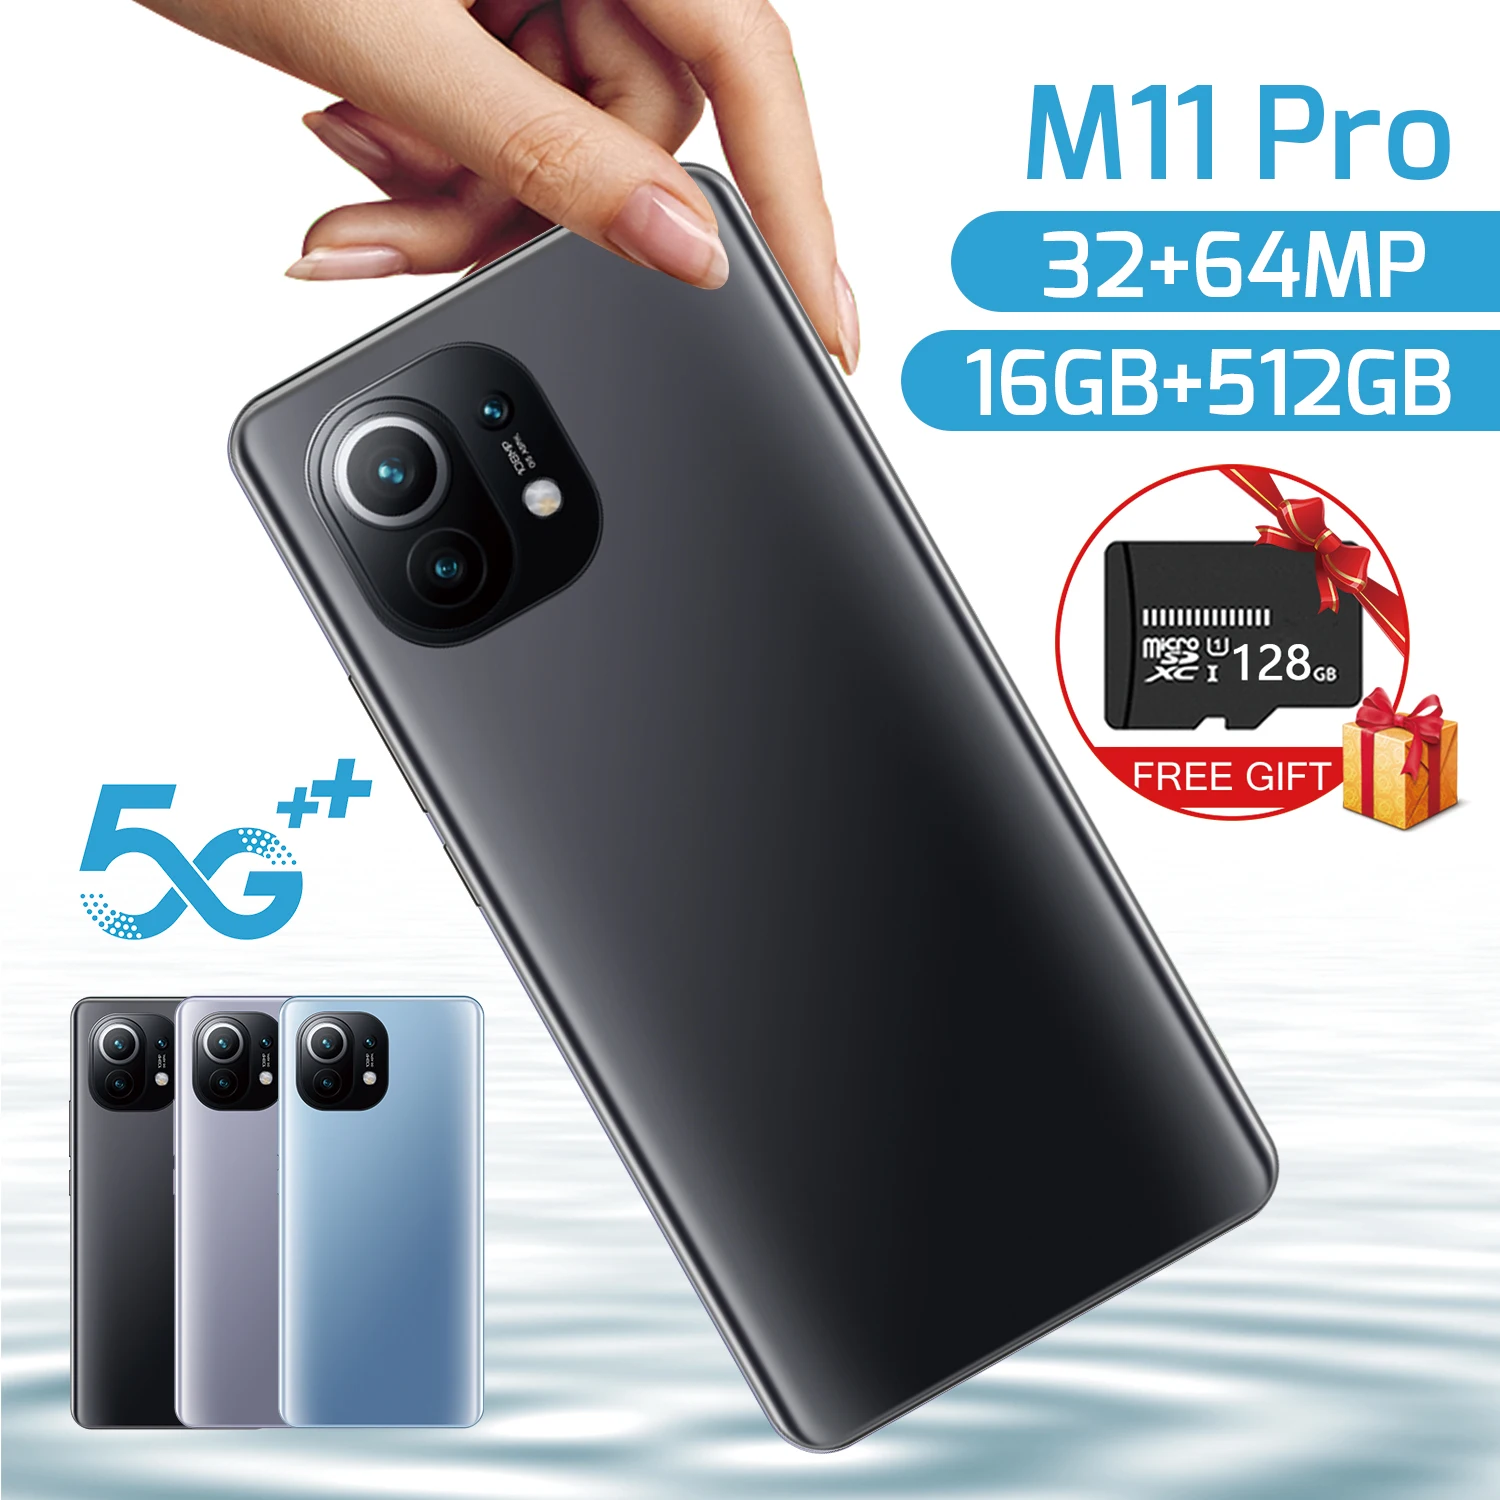 smart phone m11 pro 7 3 inch 64mp hdcamera16512gb android 11 phone 6800mah face id unlock 3 1ghz cellphone global 4g 5g mobile free global shipping